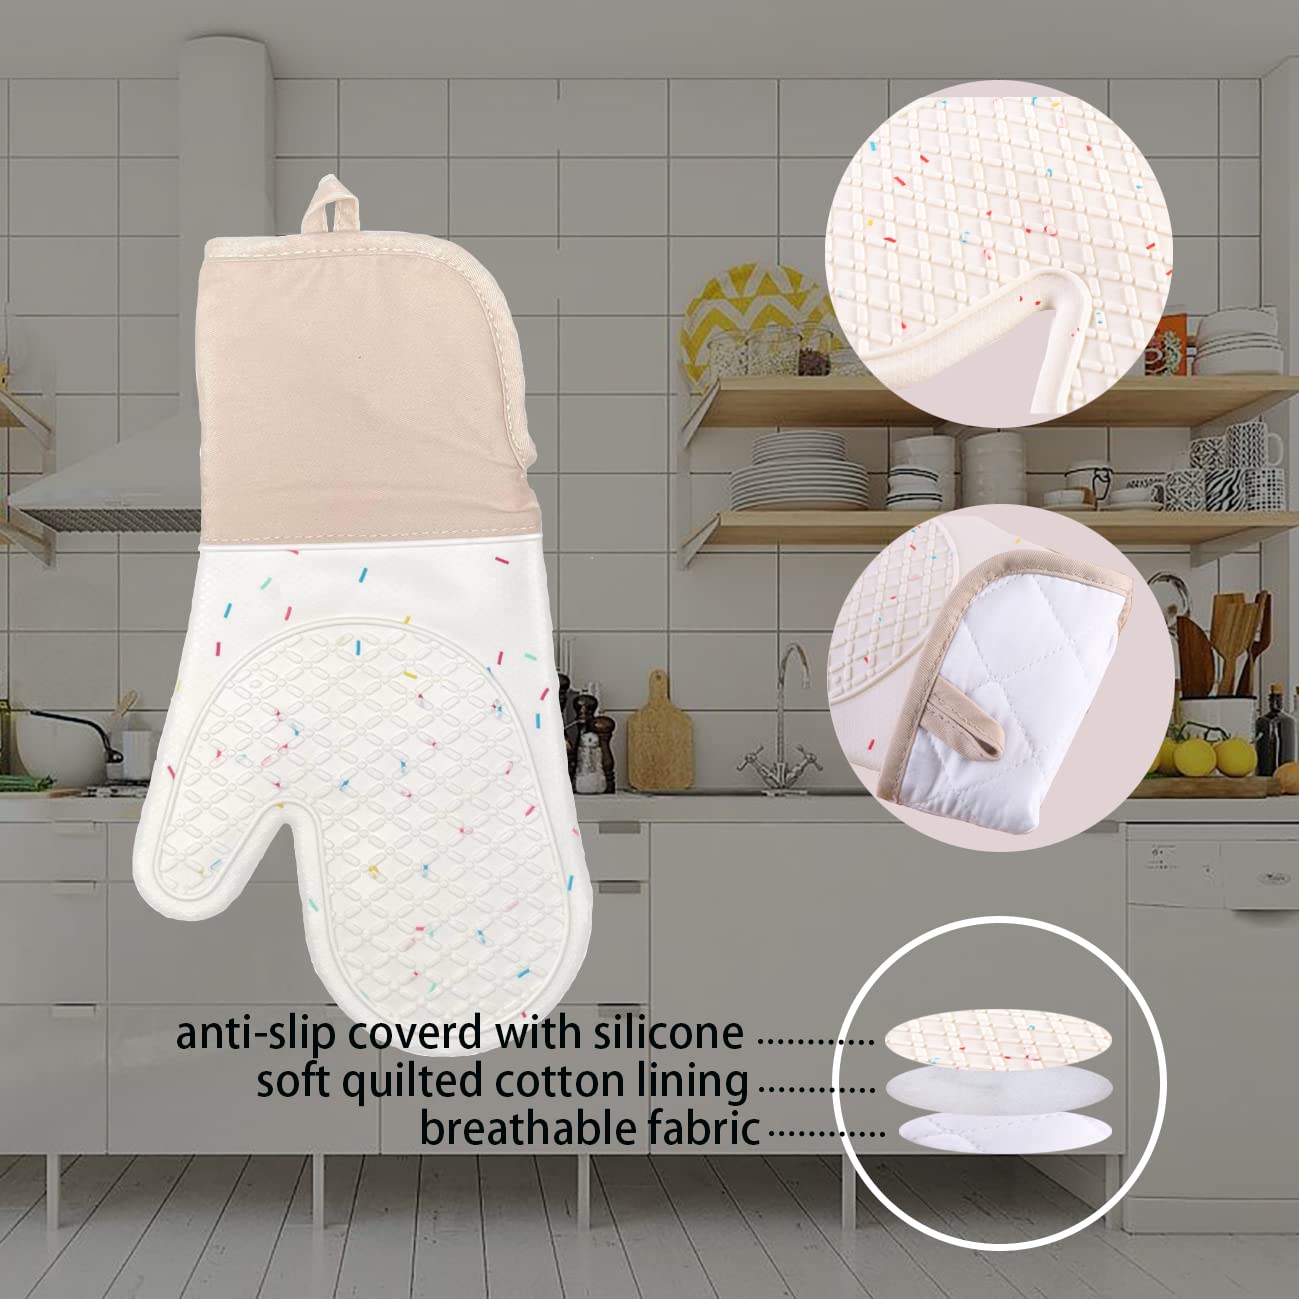 Oven Mitts and Pot Holders Sets 4Pcs Set, Lengthen High Heat Resistant Oven Glove Set, Waterproof Silicone Fashion Cute Microwave Gloves Safe for Baking,Cooking, BBQ